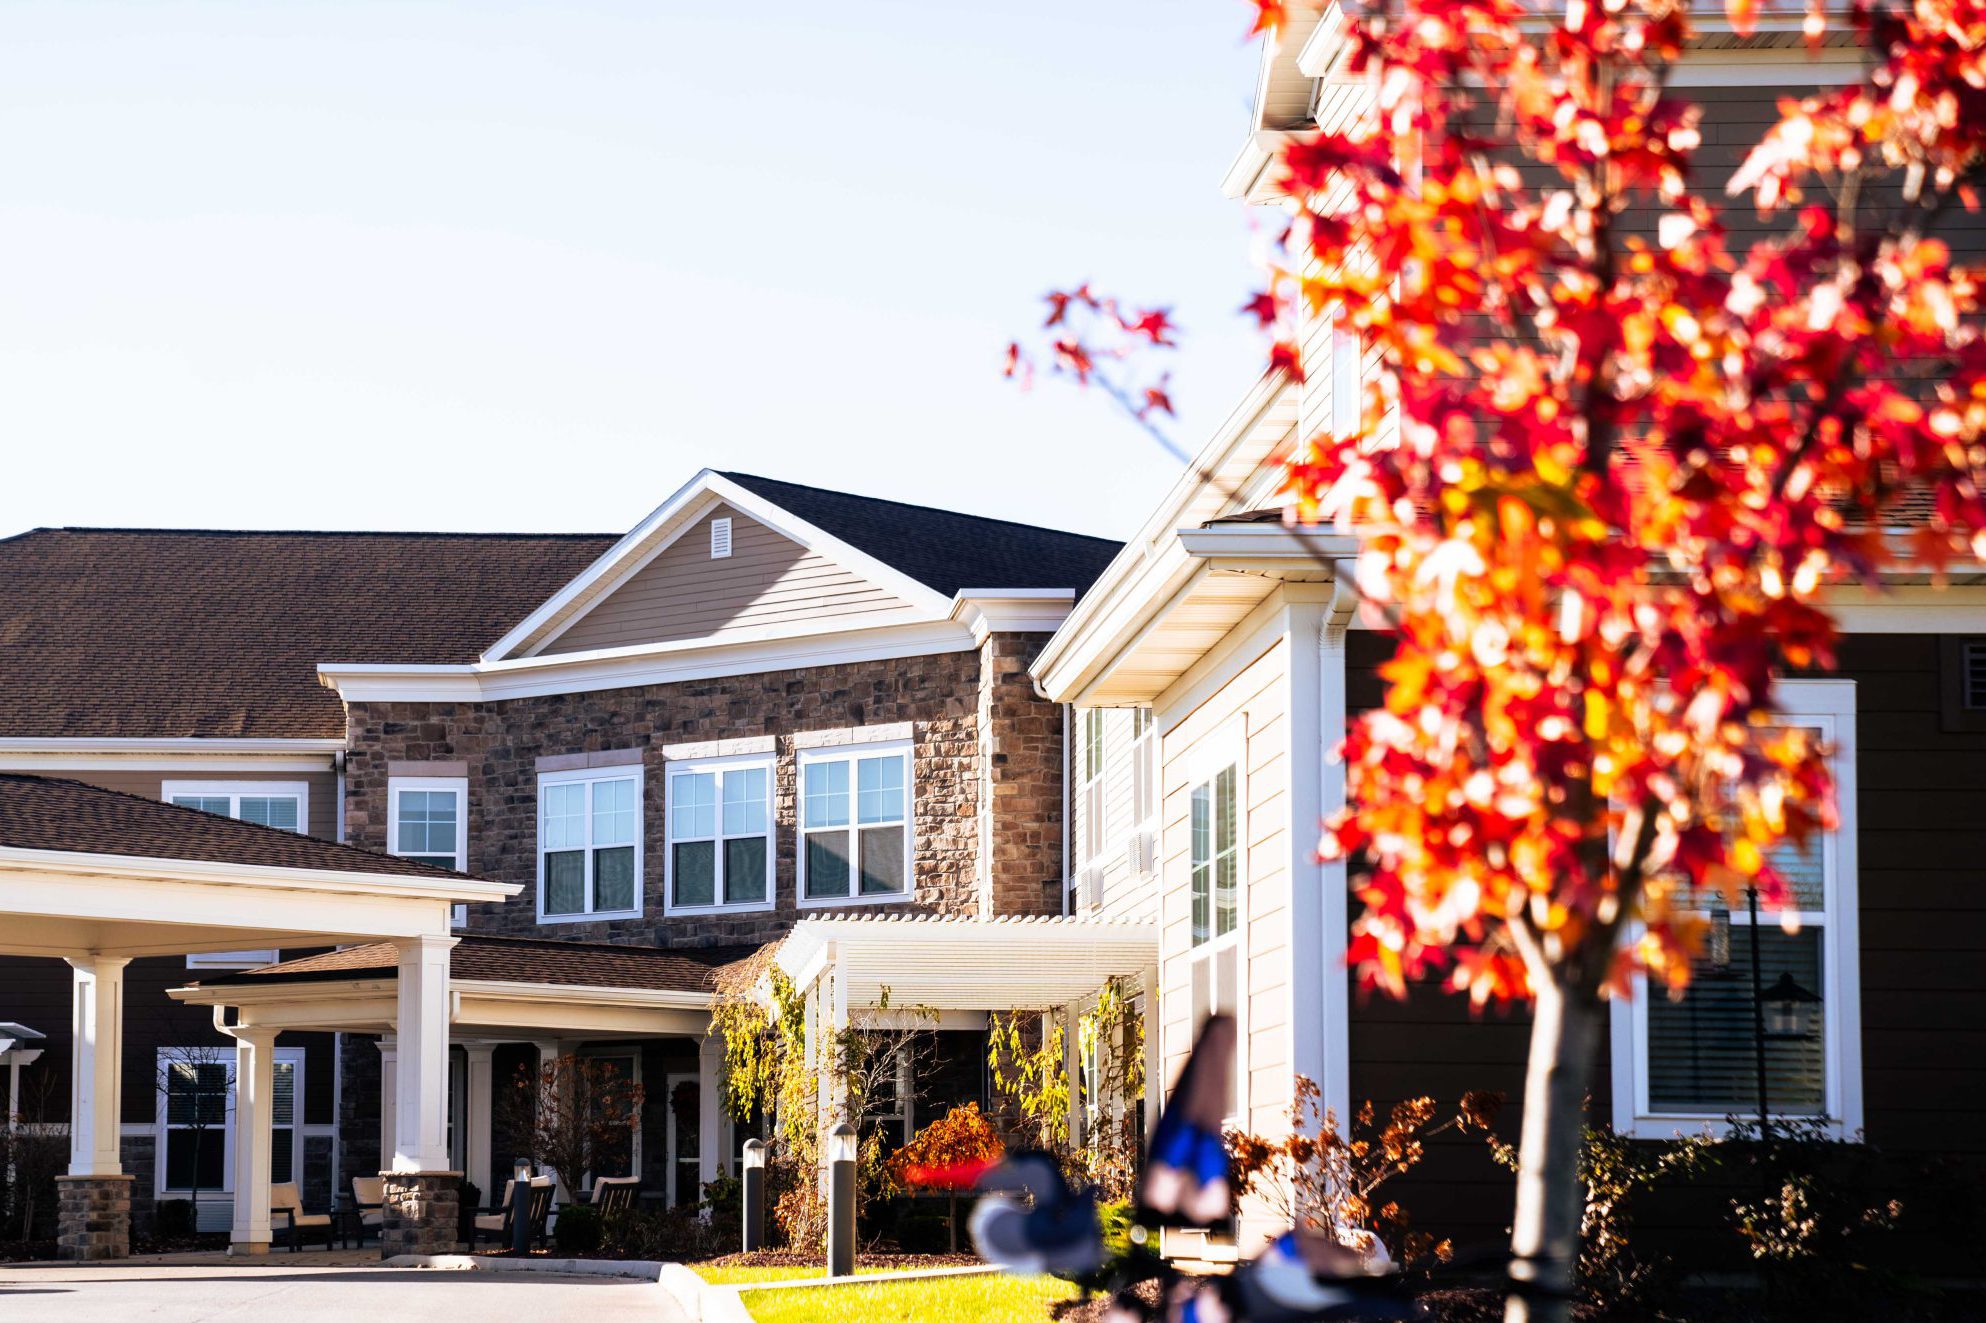 Lutheran Life Villages - The Village at Pine Valley Assisted Living